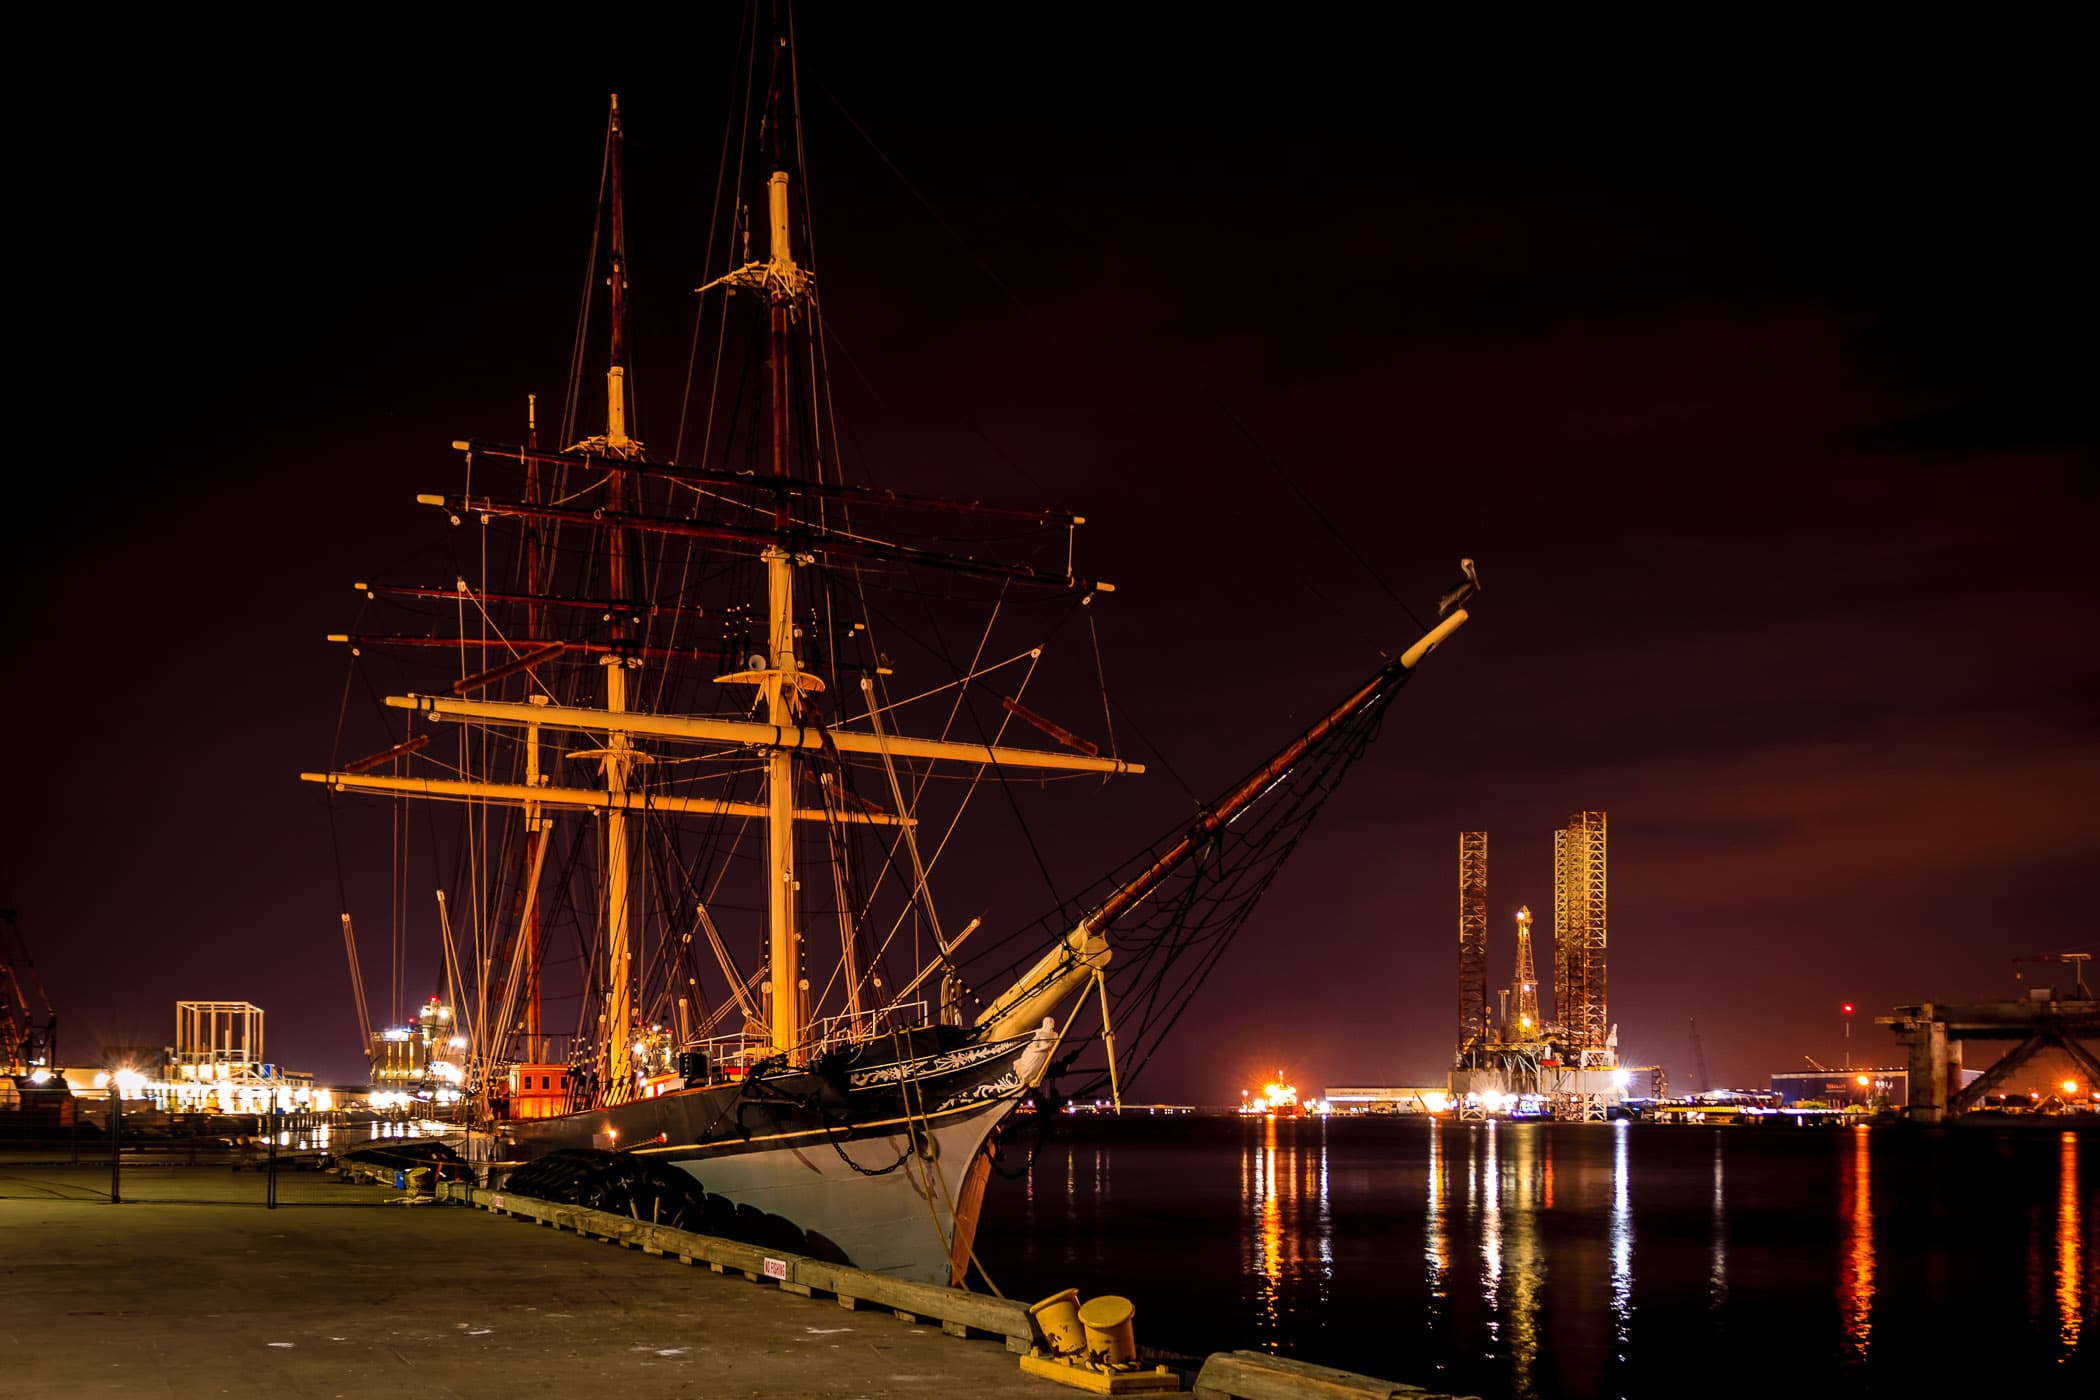 A night time shot of the Elissa, a tall ship launched in 1877 and now ported in Galveston, Texas.